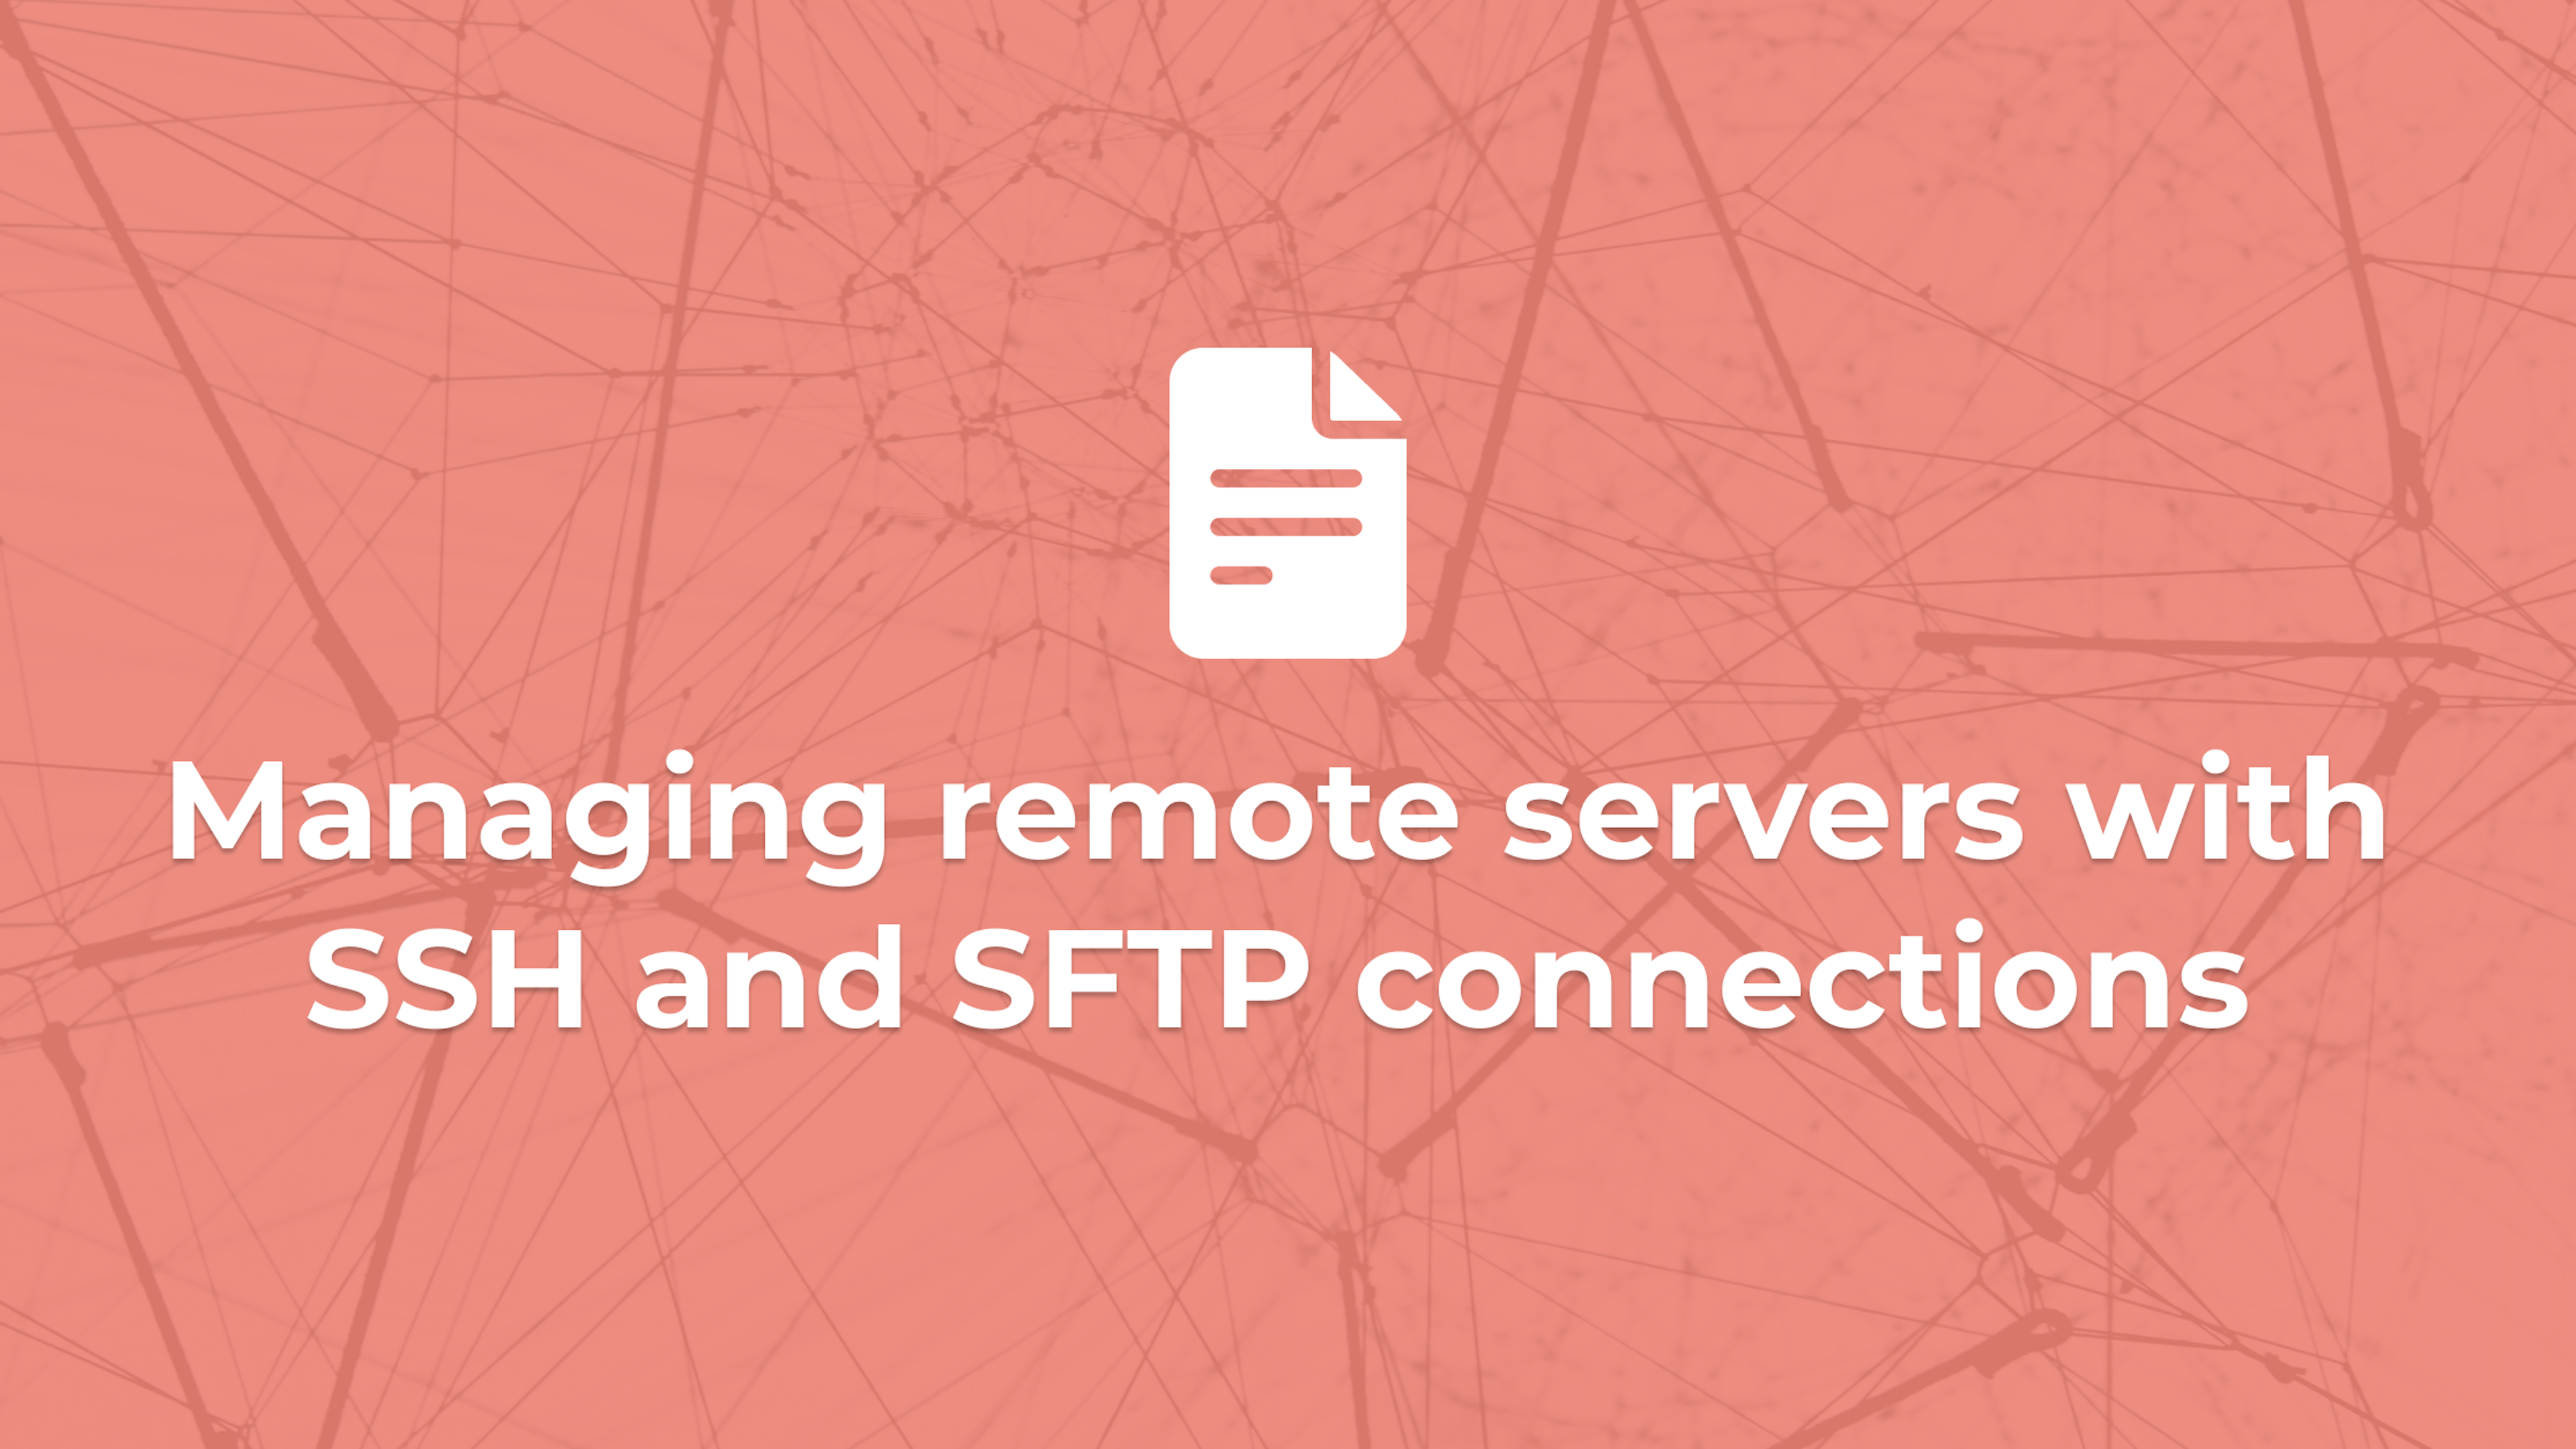 Managing remote servers with SSH and SFTP connections: a step-by-step guide